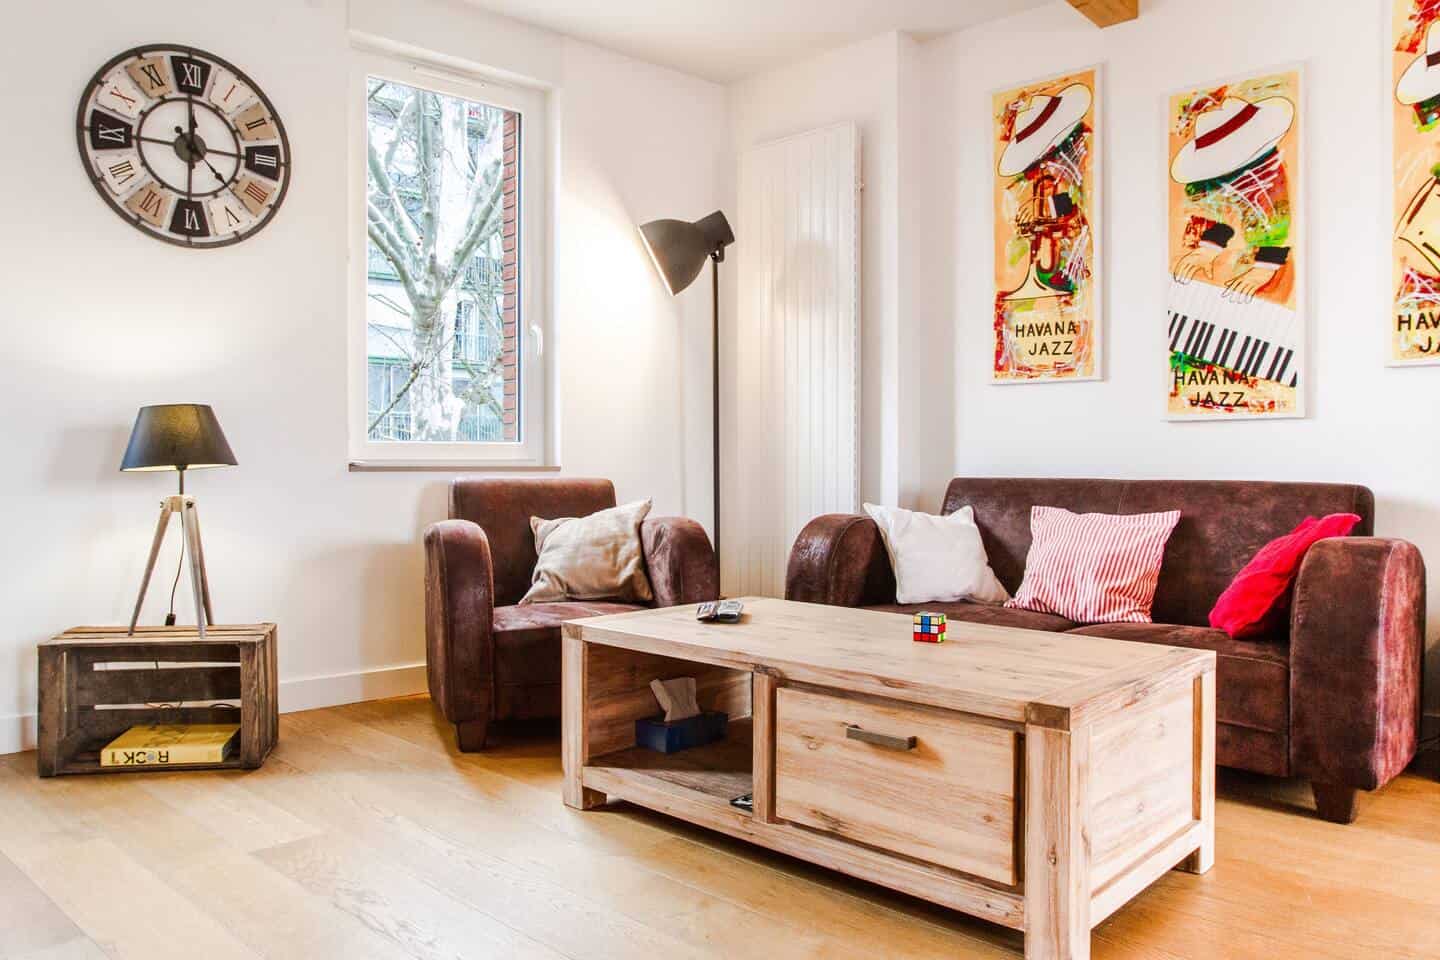 Image of Airbnb rental in Toulouse, France